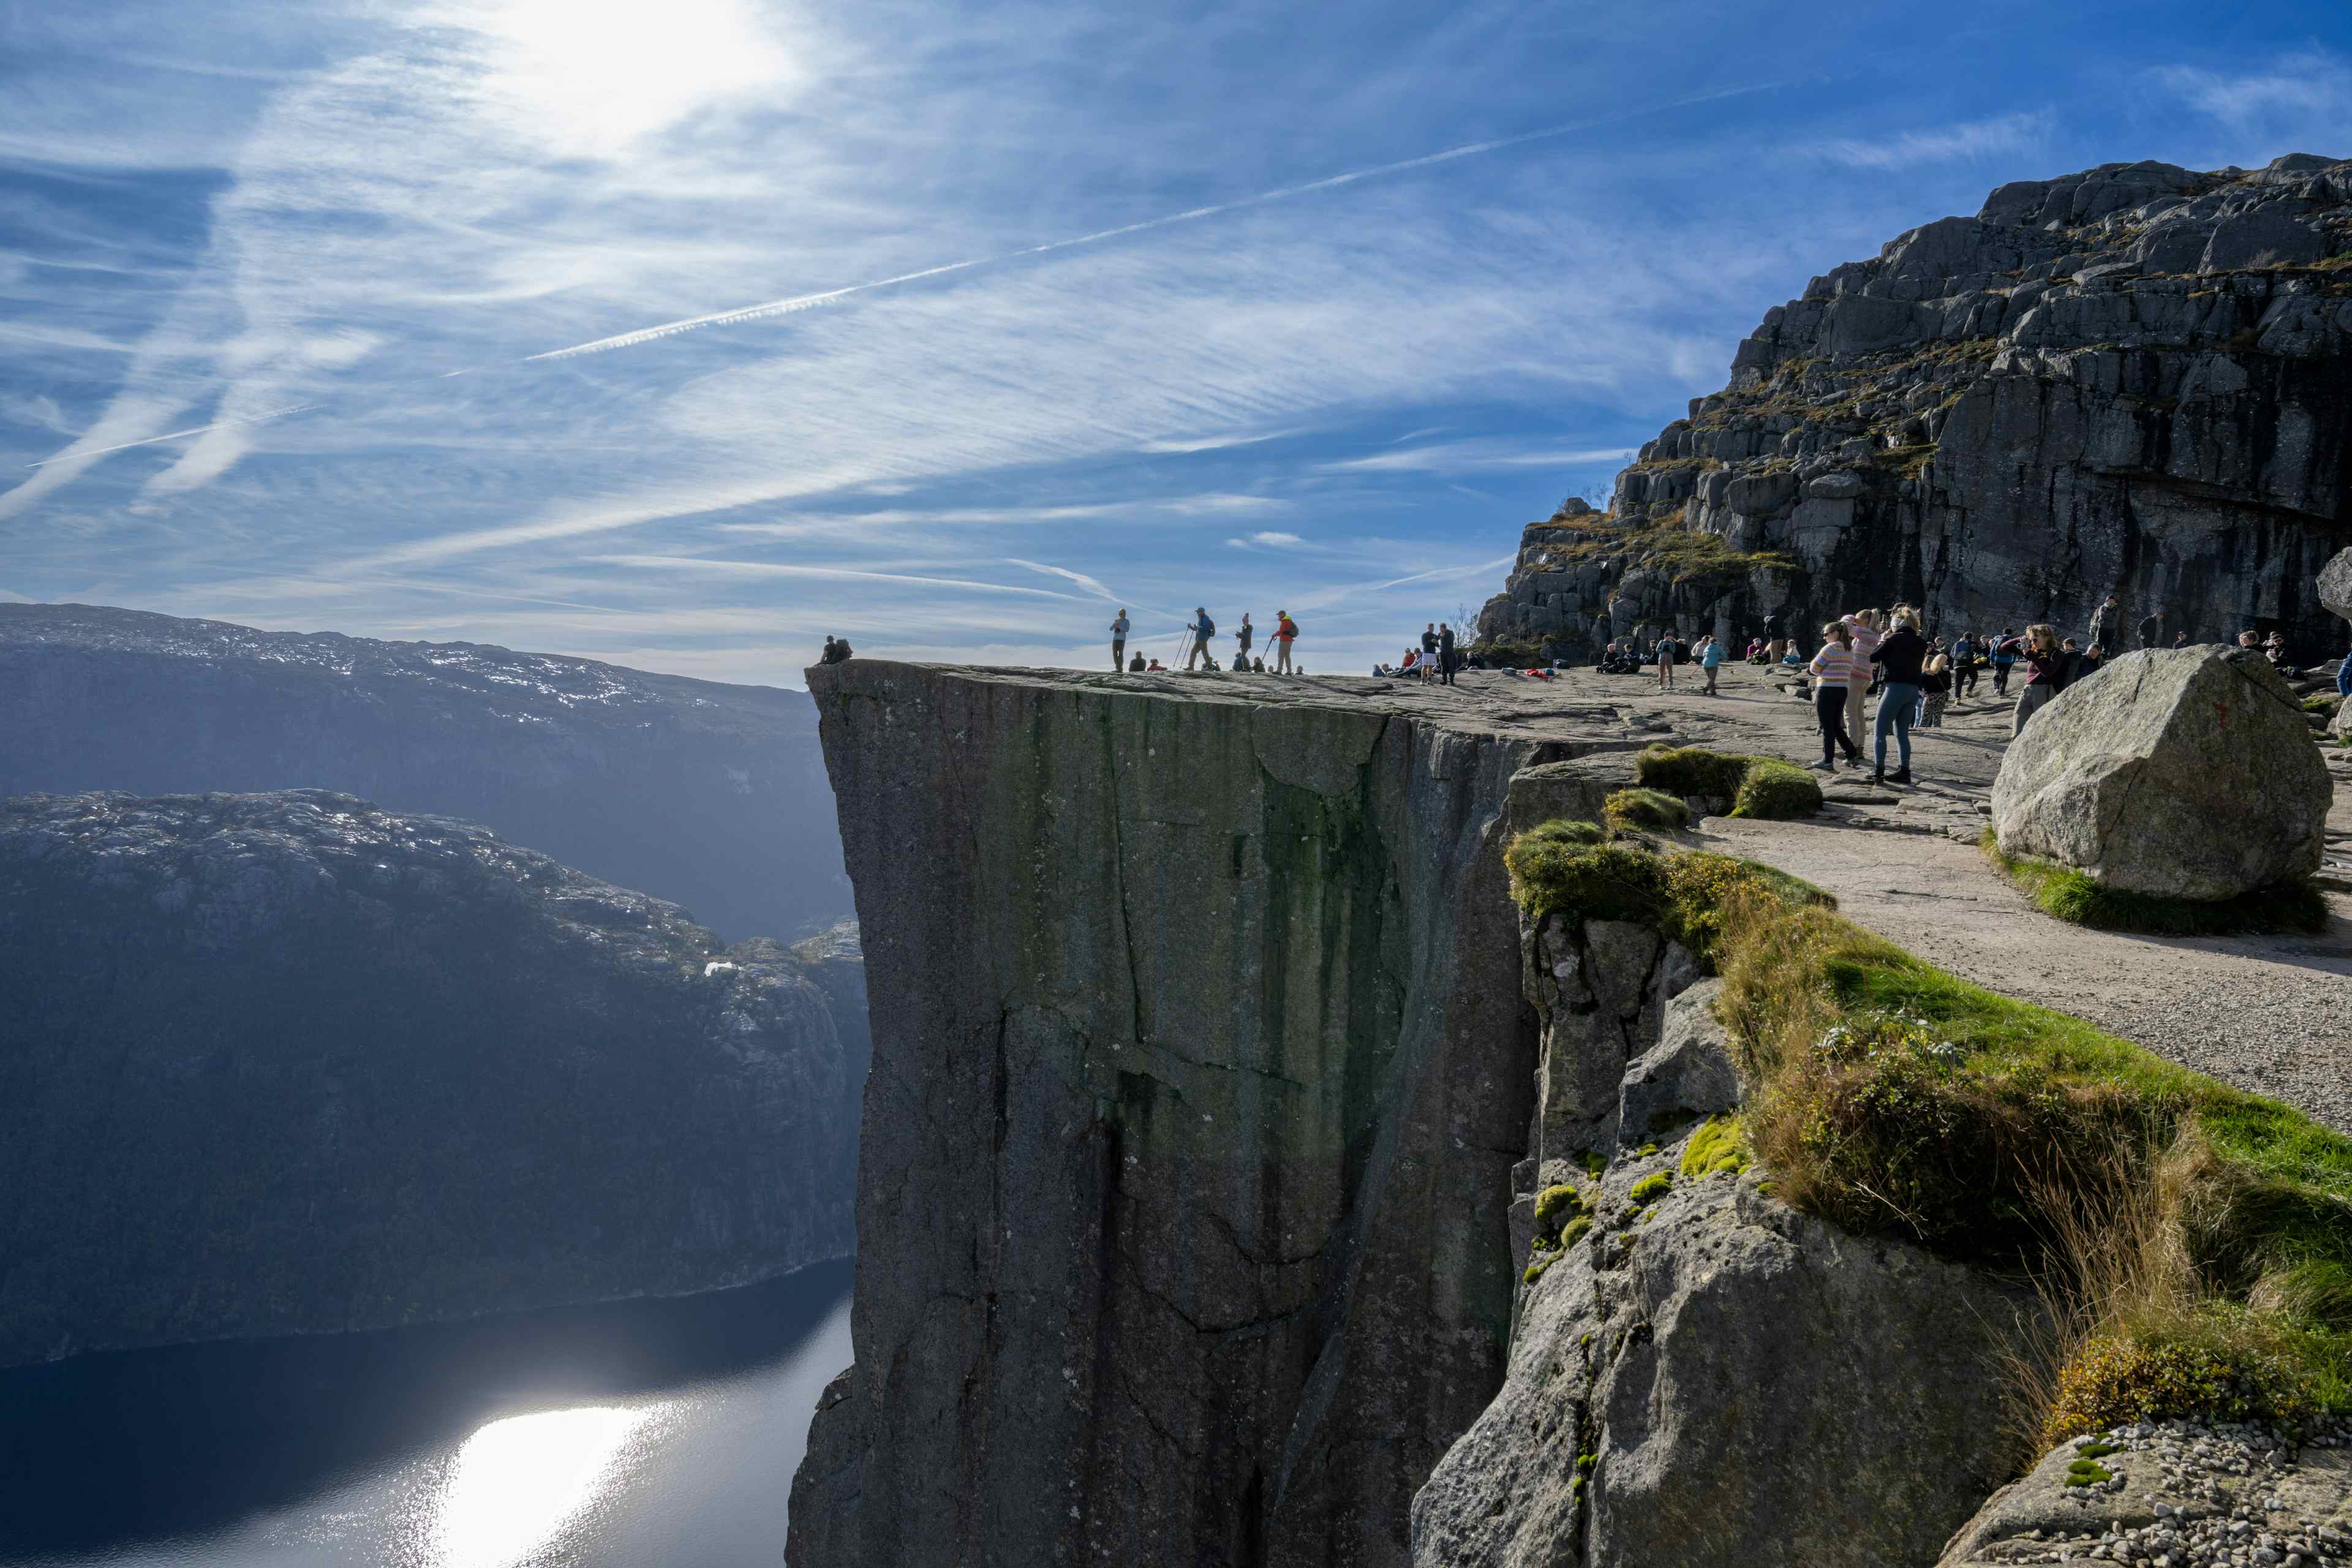 People standing on a mountain plateaut more than 600 metres above fjord level. Blue sky and sunny day. Steep mountains and fjord. Guided hike to Preikestolen